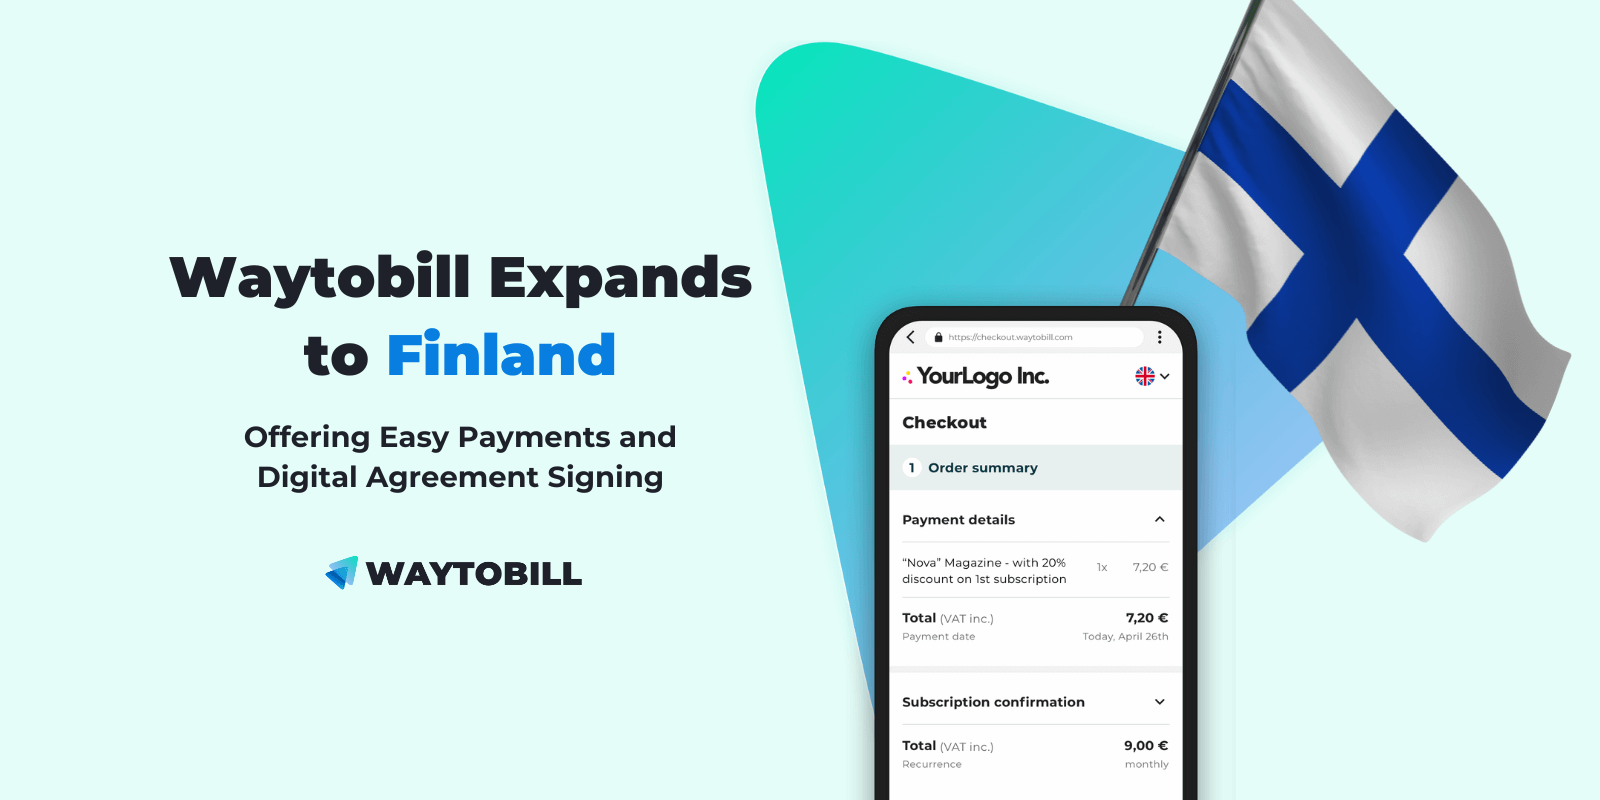 Waytobill Expands to Finland: Easy Payments & Digital Agreement Signing